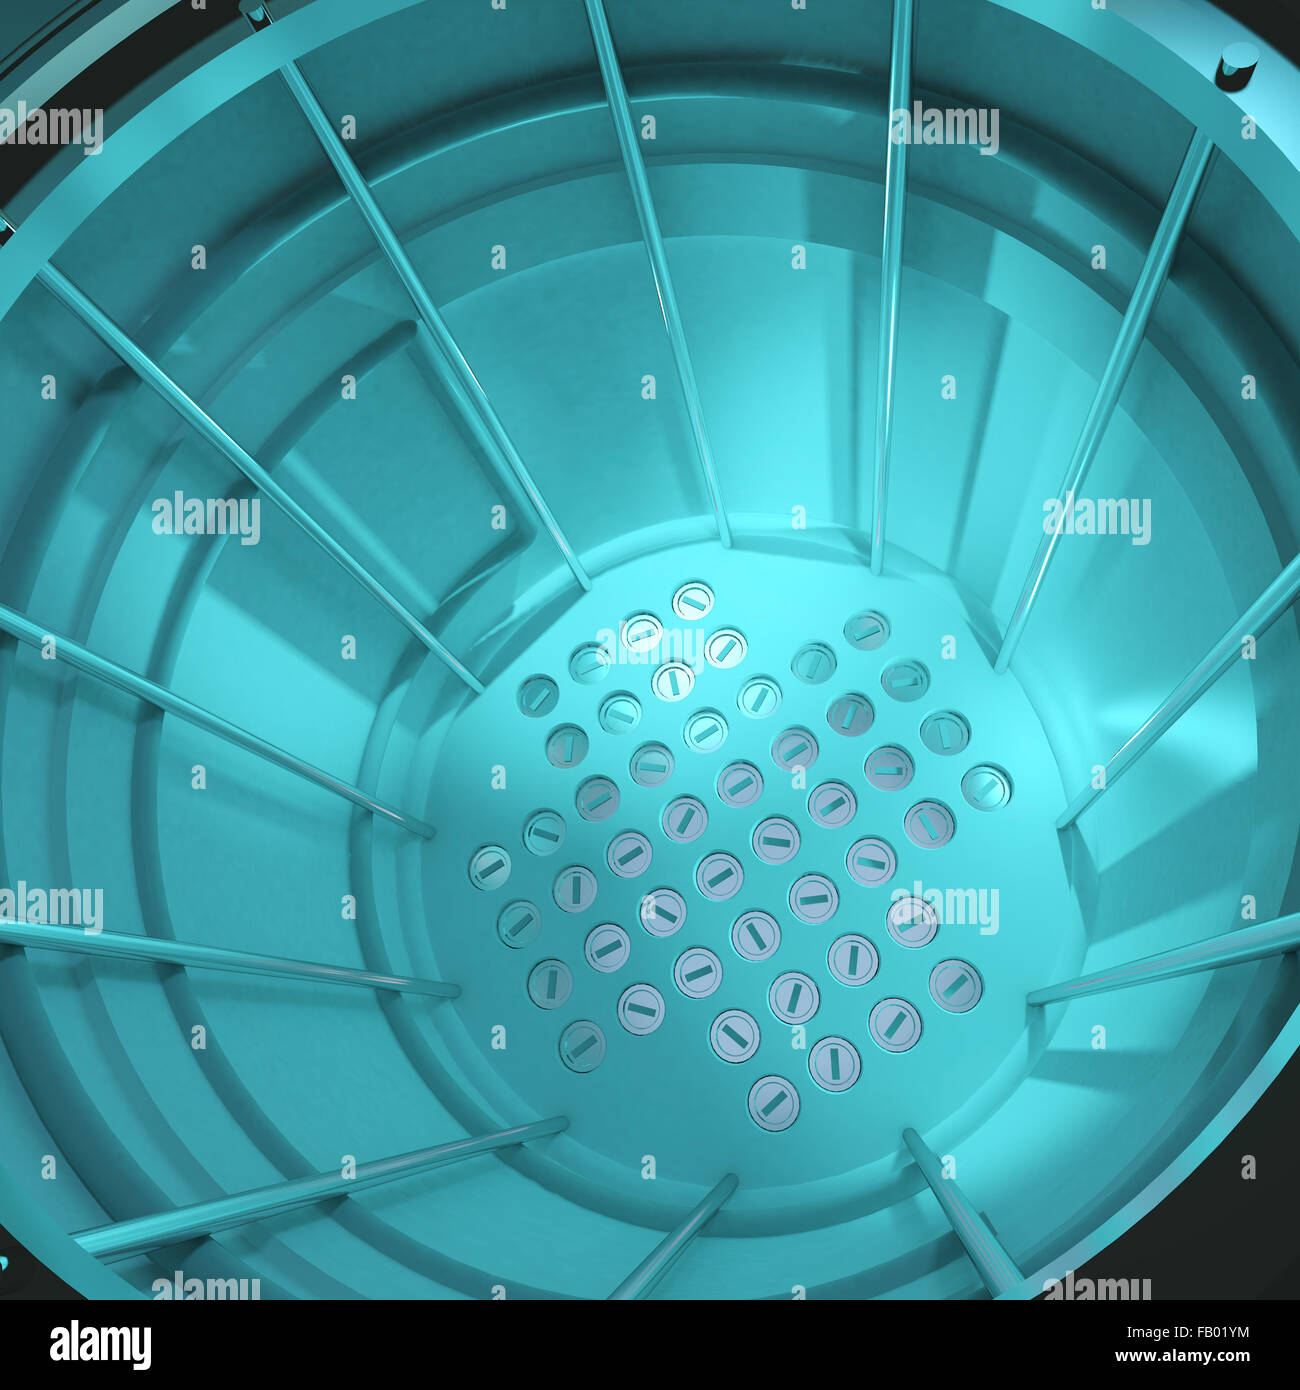 3d render of a close up of a nuclear reactor core. Stock Photo